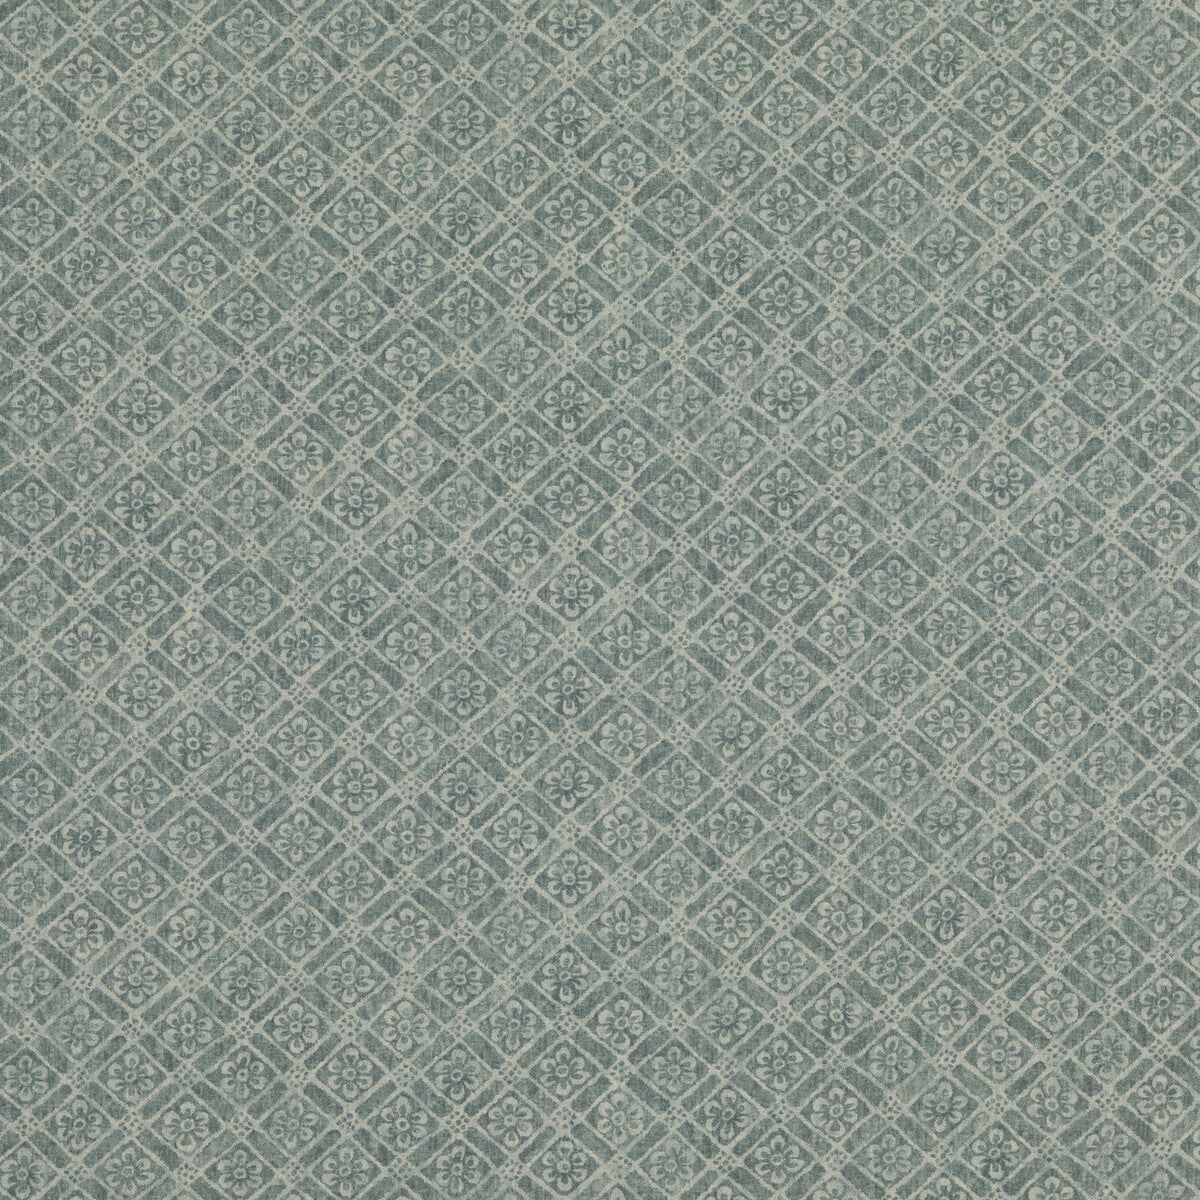 Moreton Trellis fabric in teal color - pattern BP10775.3.0 - by G P &amp; J Baker in the Signature Prints collection